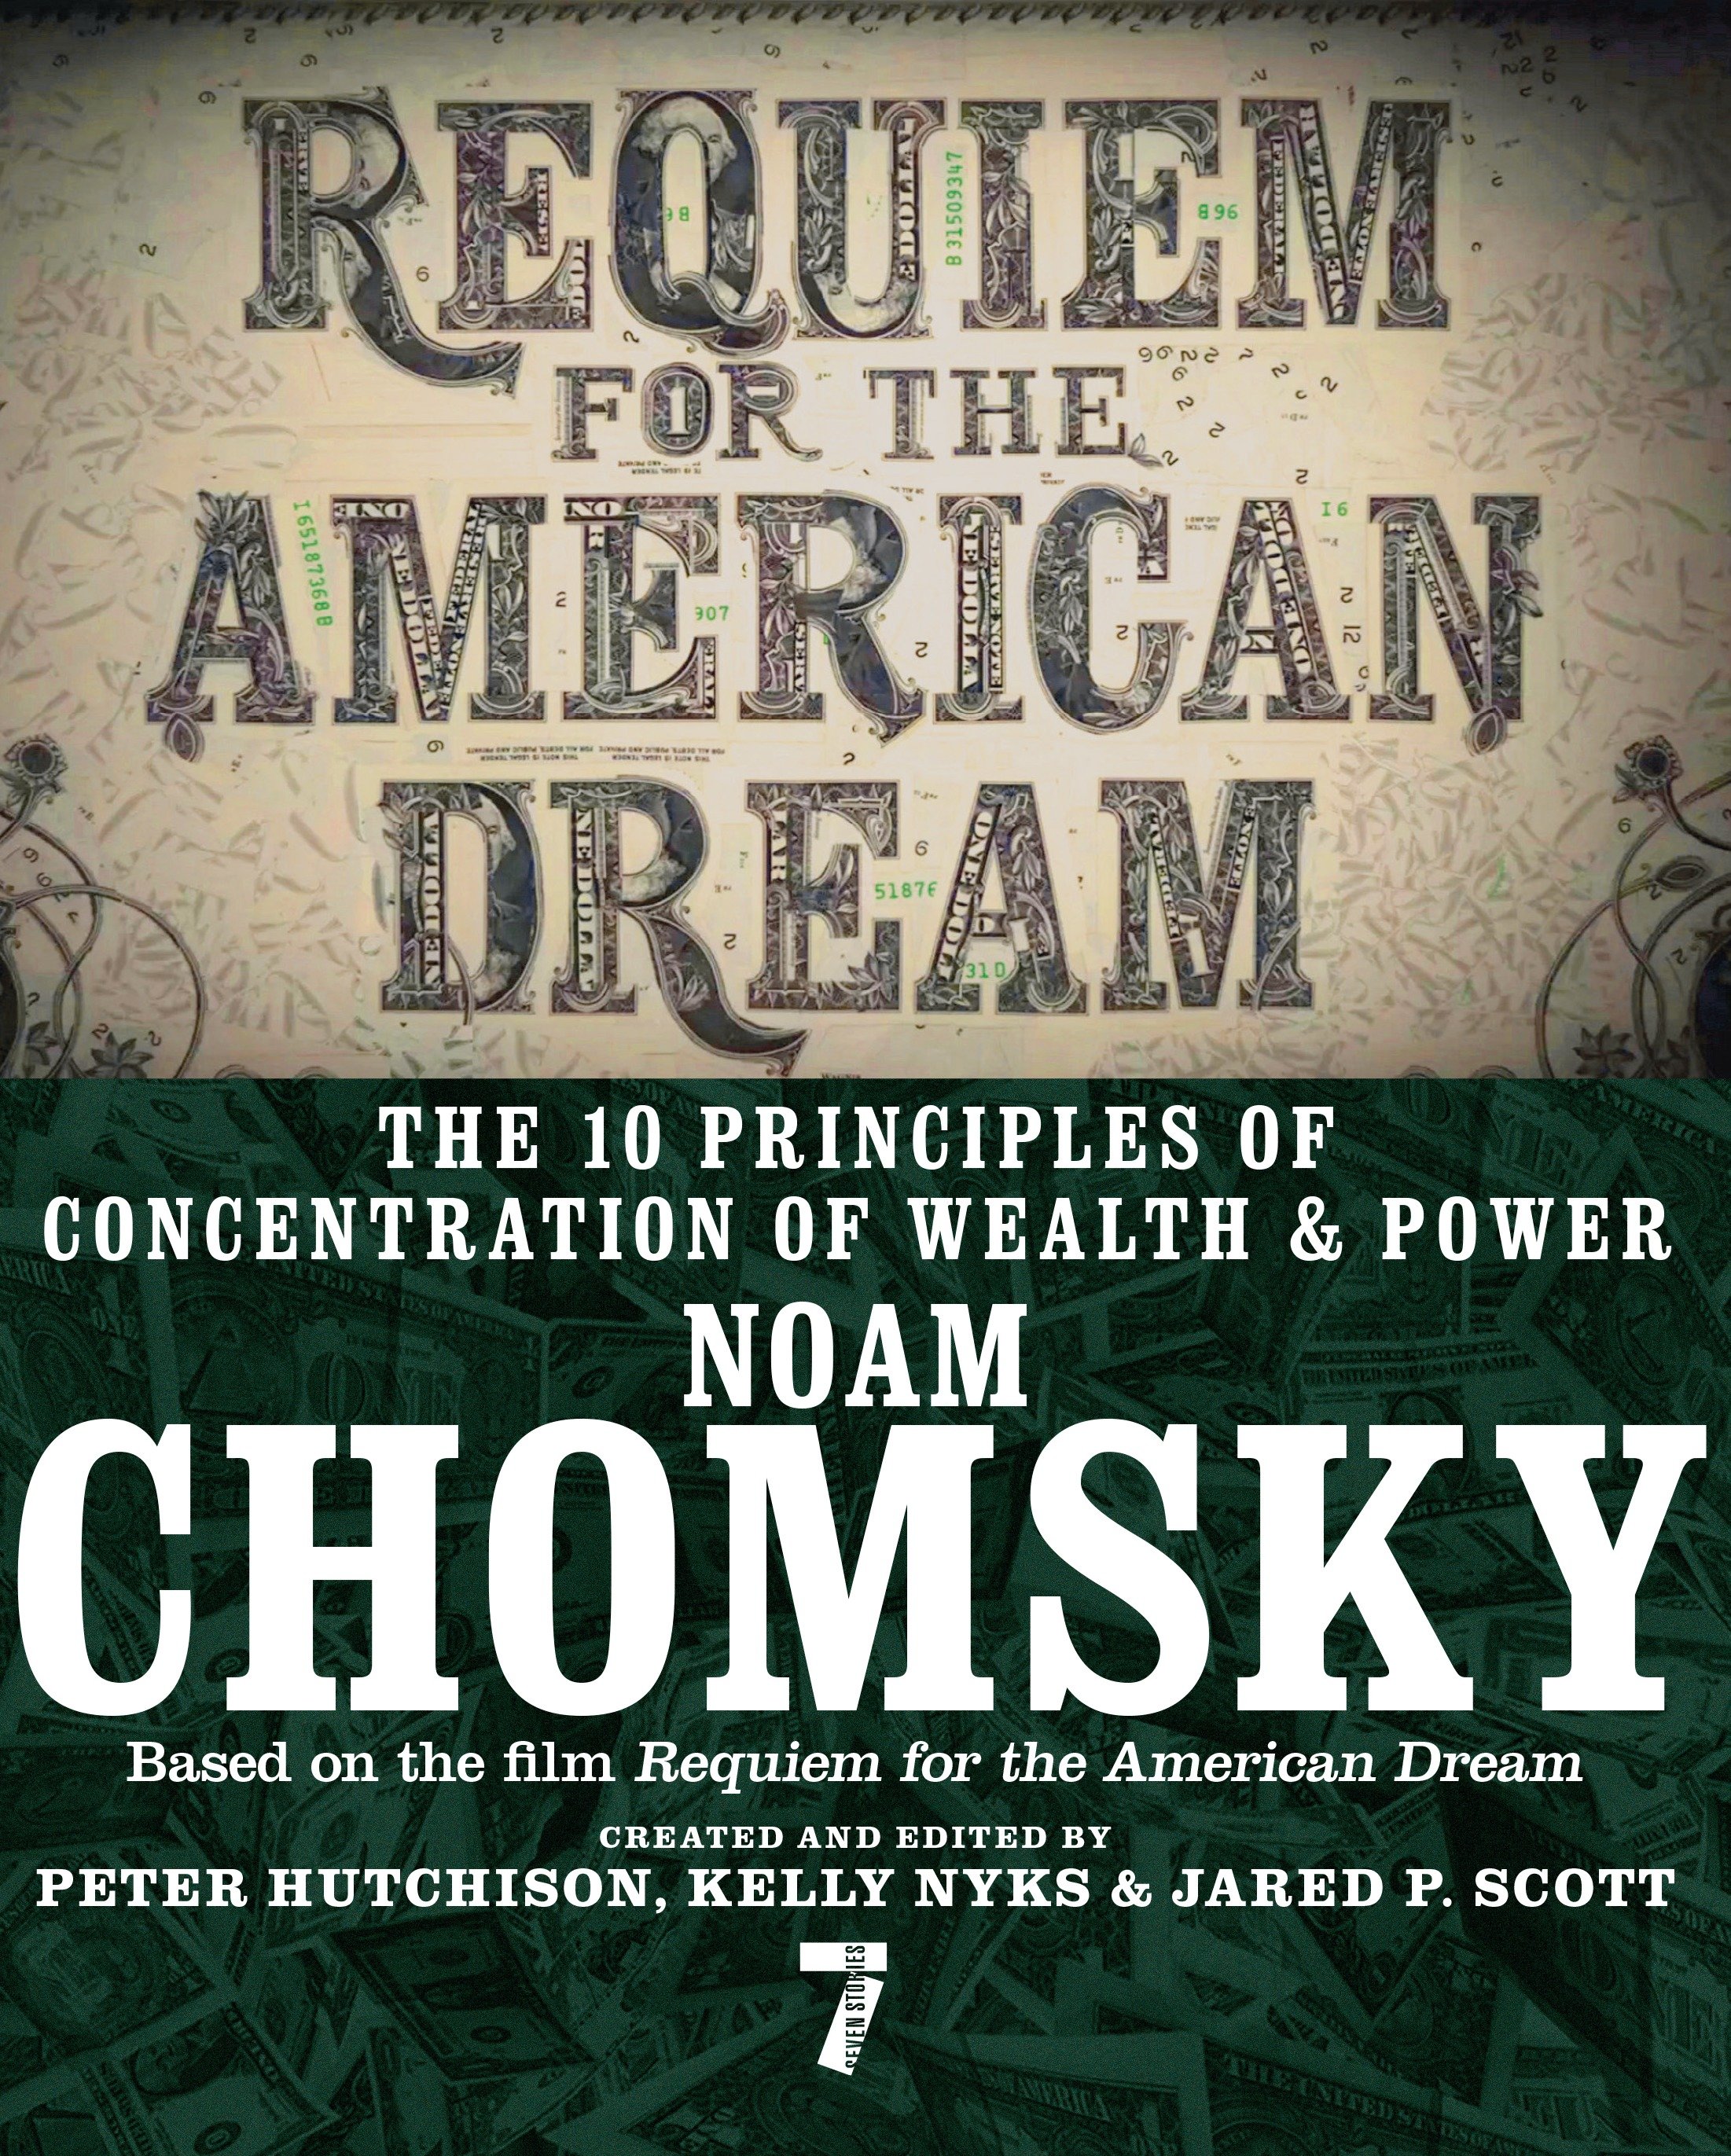 Requiem for the American dream the 10 principles of concentration of wealth & power cover image